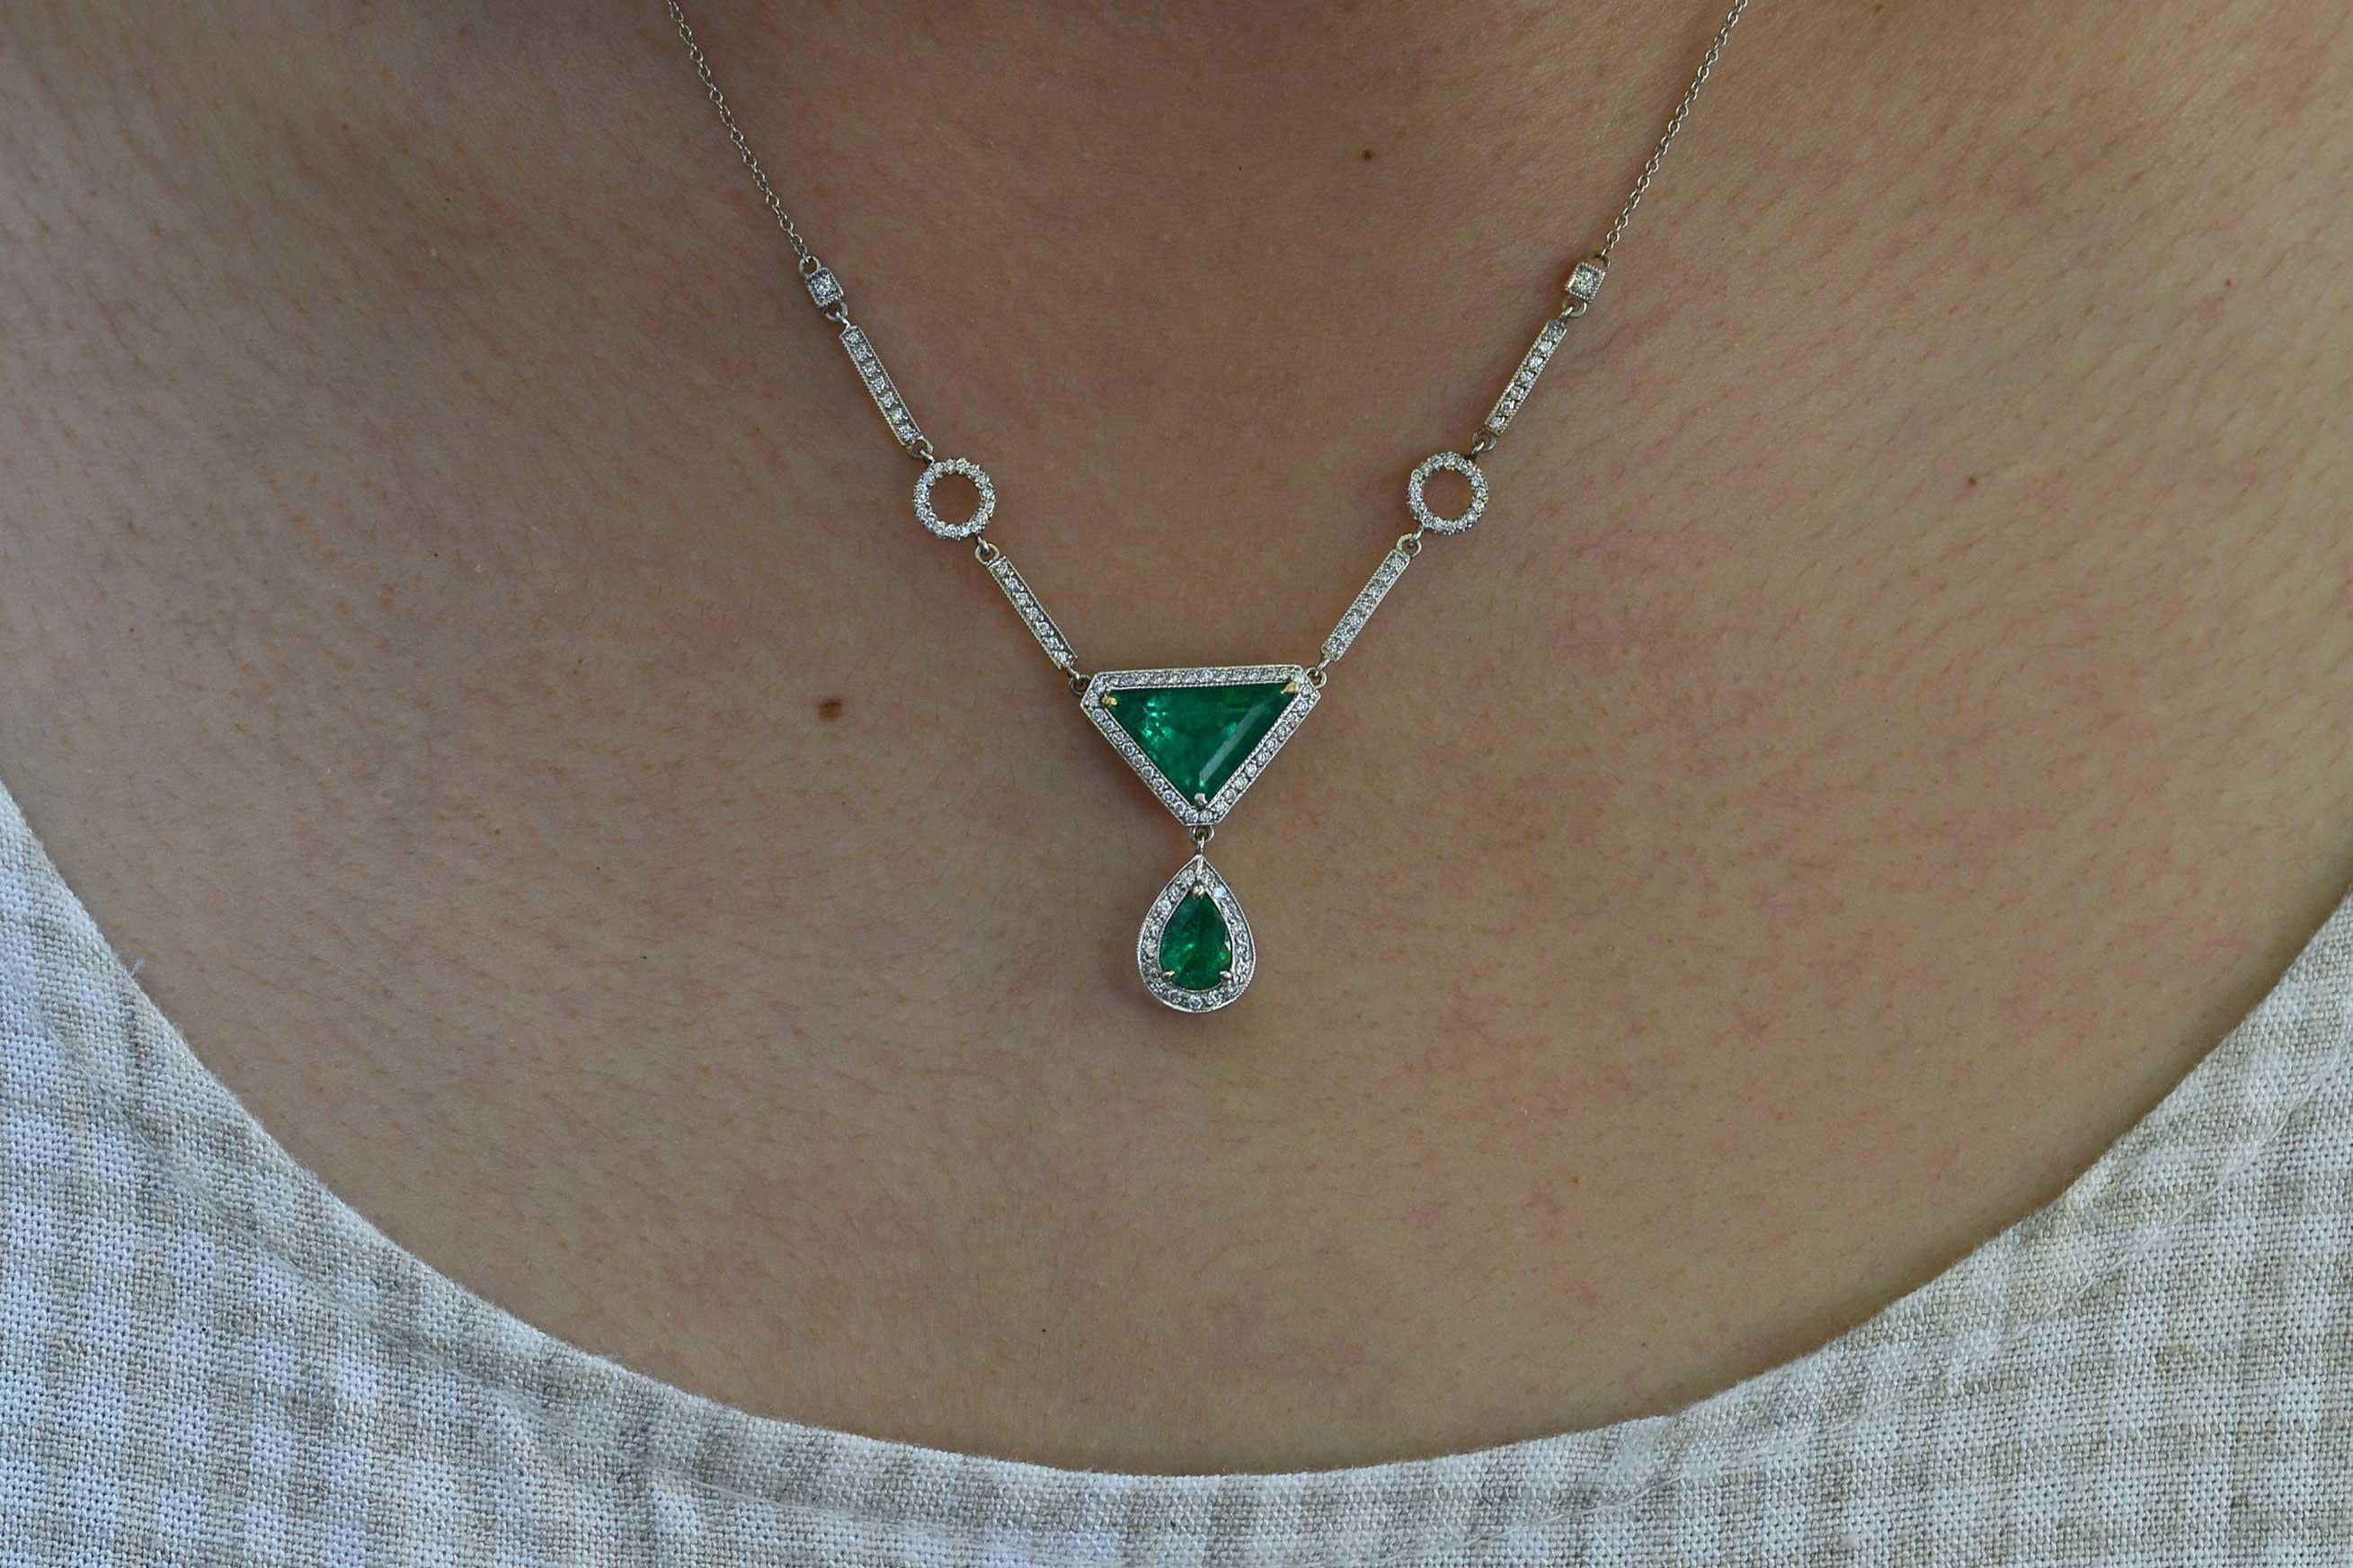 The Buckeye Vintage Necklace. A simple, yet simply breathtaking Art Deco style drop necklace. This vibrant, vivid Emerald suite glows with a fire from within. The striking, geometric triangle, teardrop, circles and bars, all framed within diamond